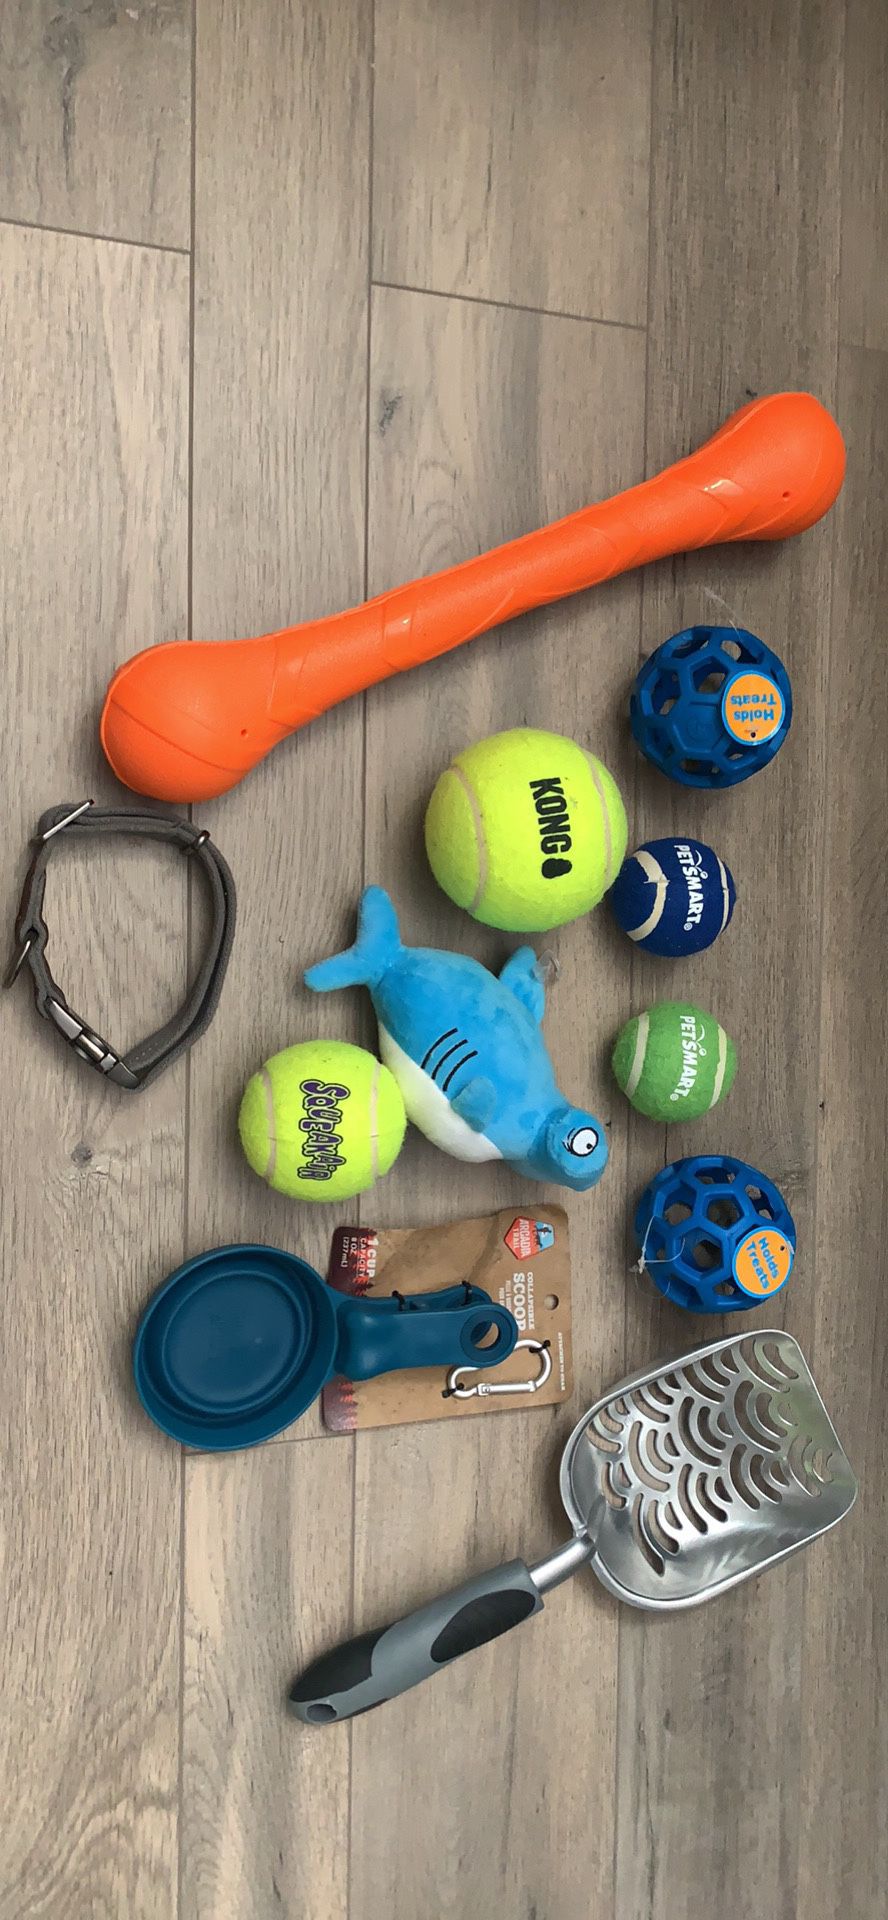 Dog toys and supplies